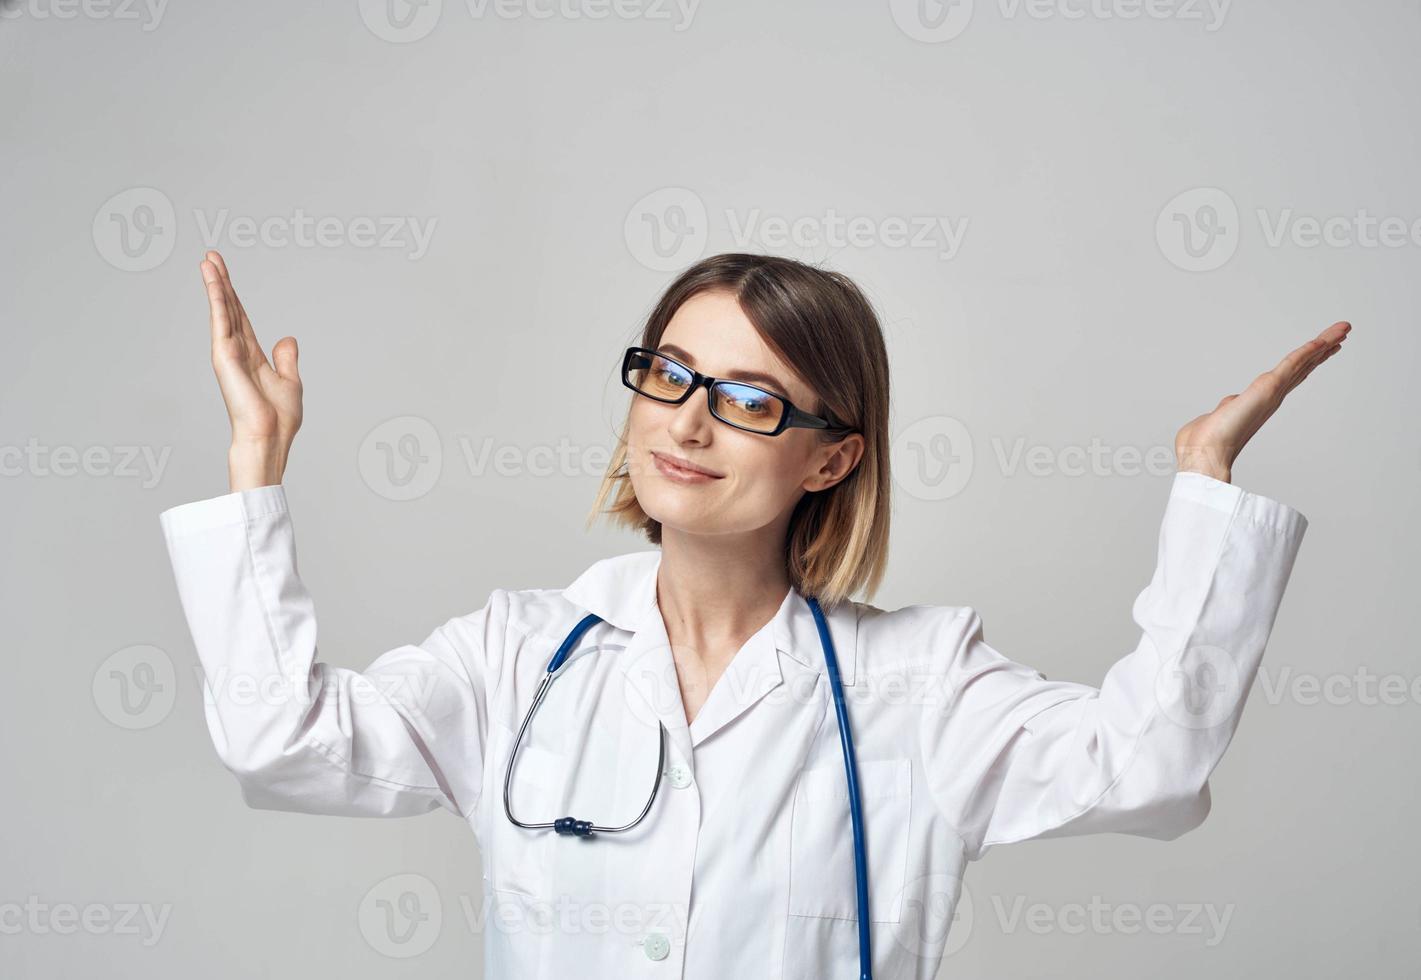 female nurse in a medical gown gesturing with her hands on a light background photo